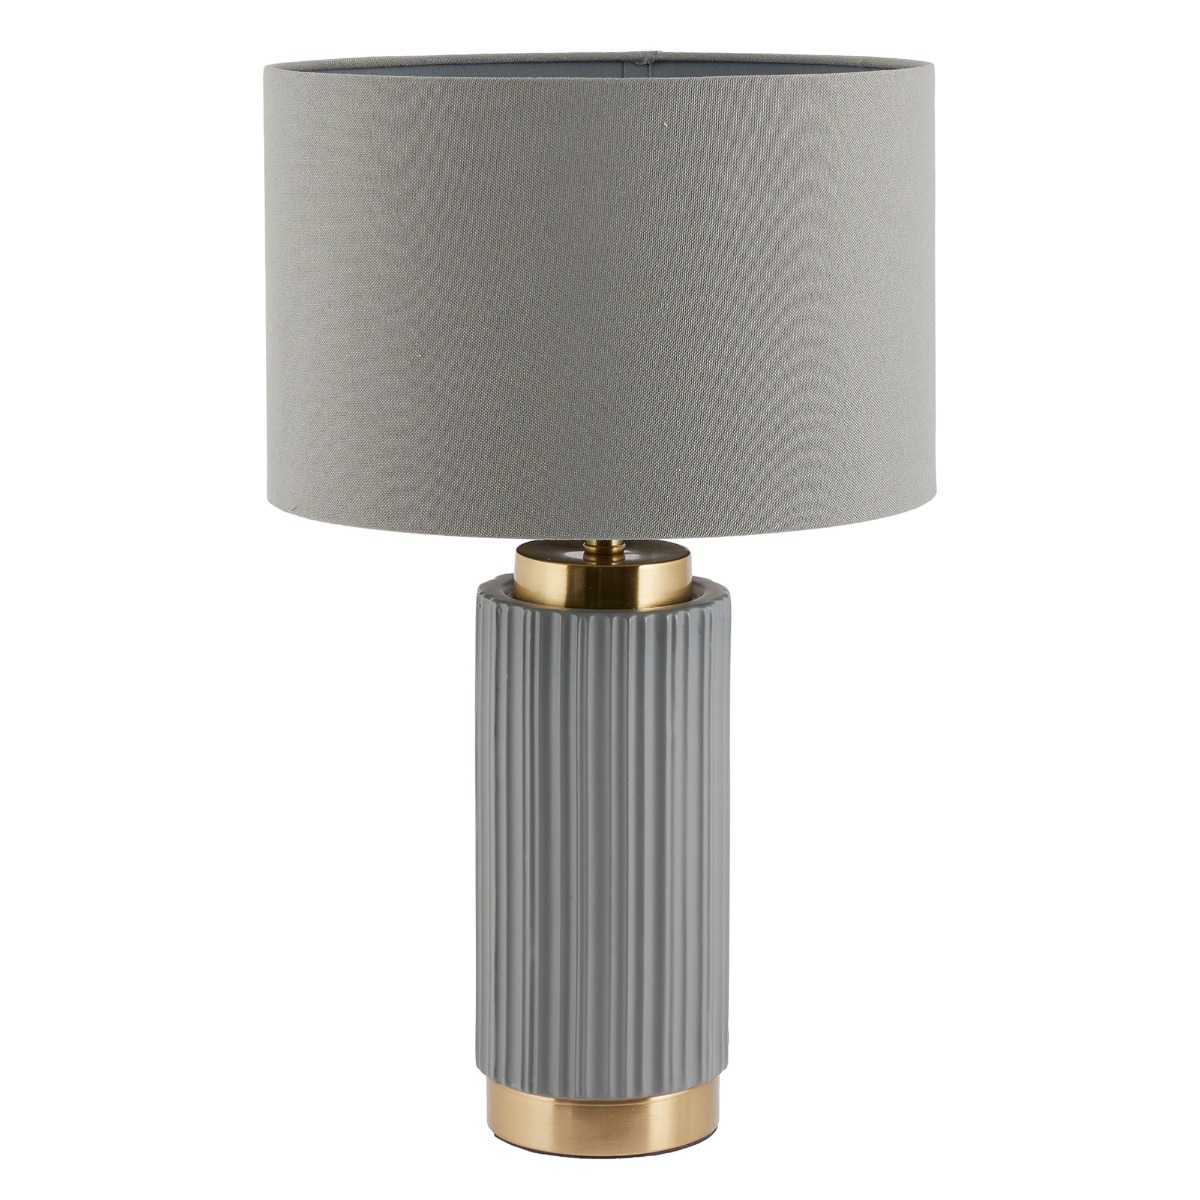 Grey & Gold Table Lamp | Barker & Stonehouse